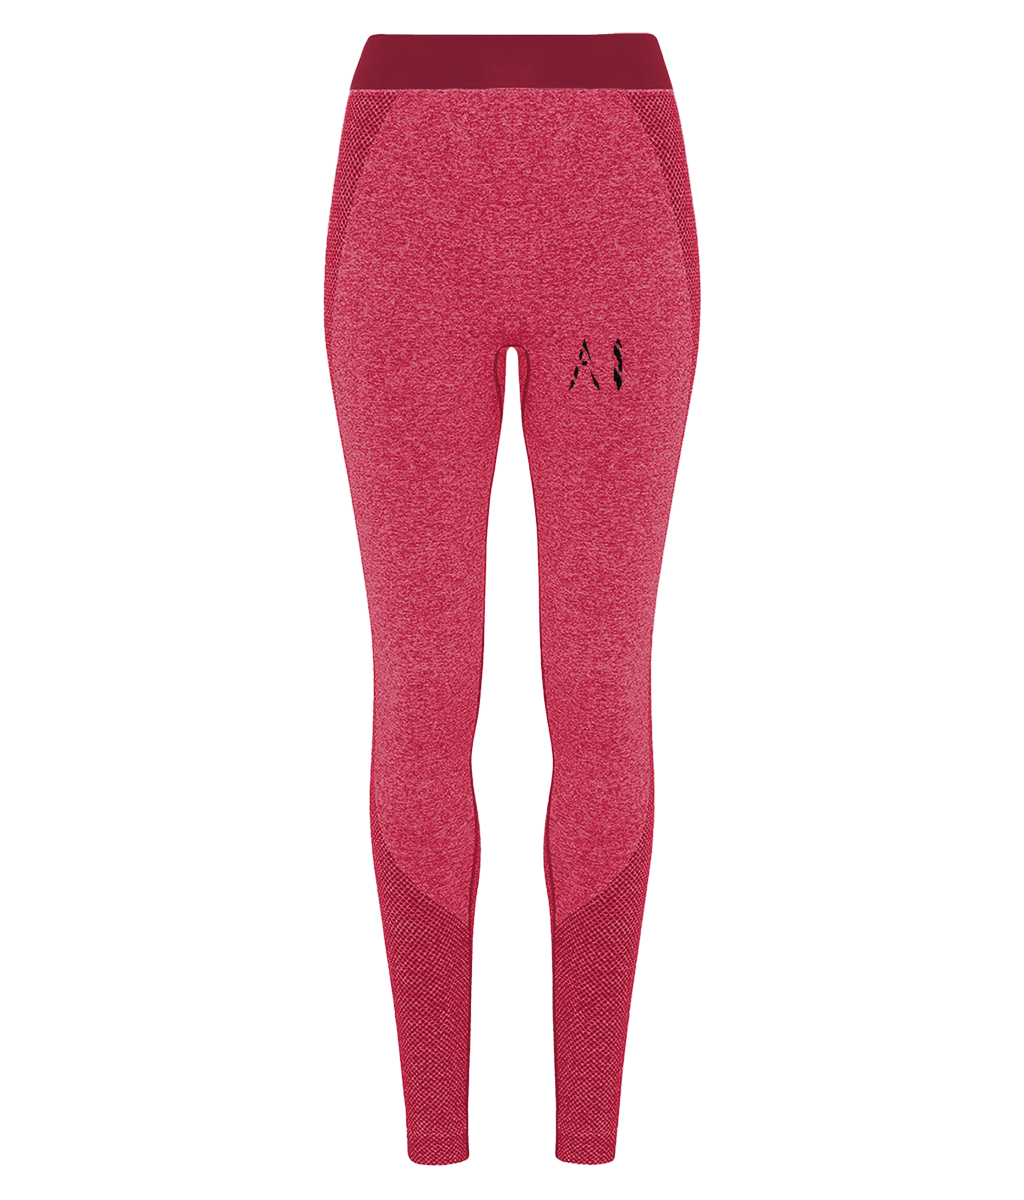 Womens Red Athletic Seamless Sports Leggings with black AI logo on upper thigh